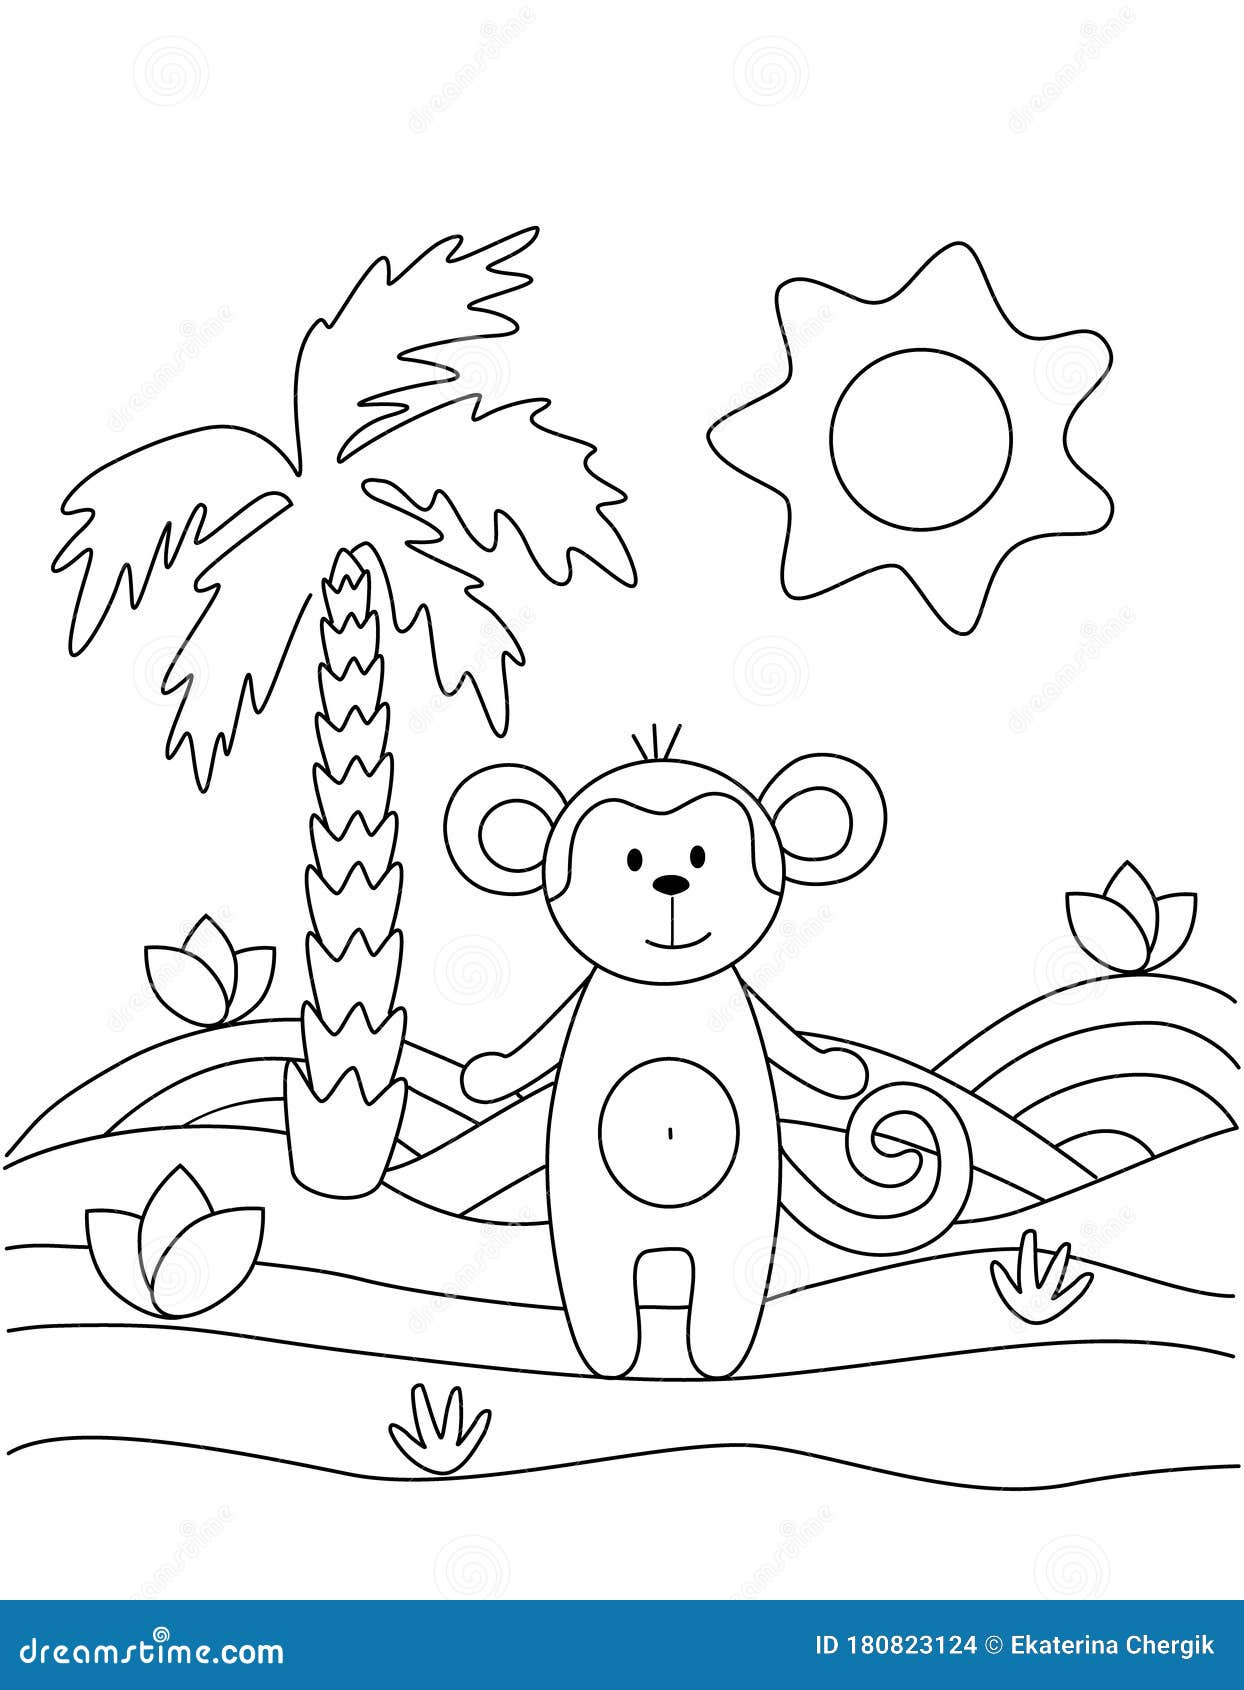 Três macacos engraçados na selva - Macacos - Coloring Pages for Adults